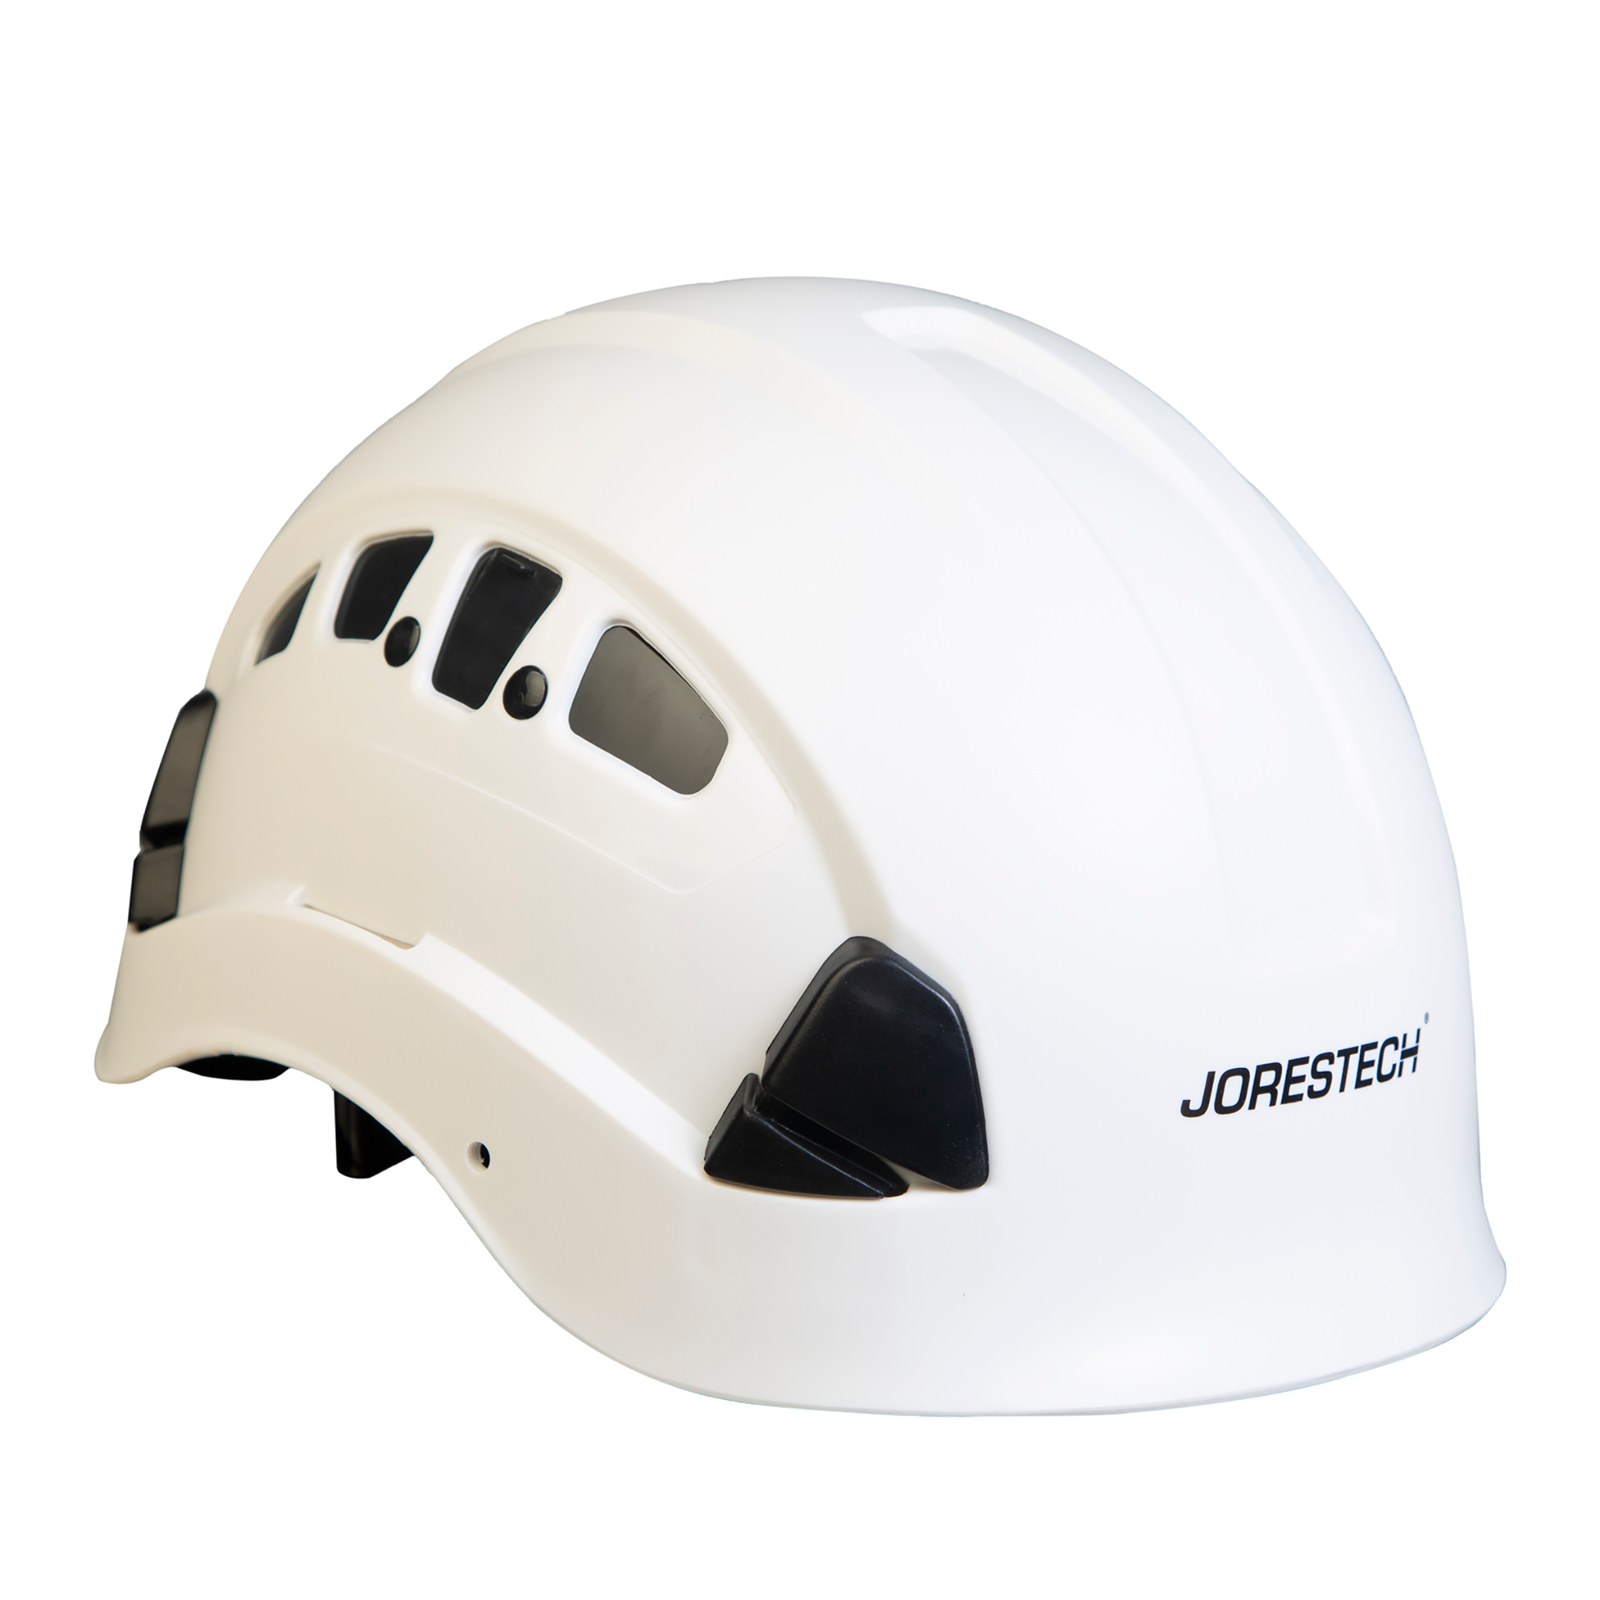 Diagonal view of the Jorestech white ventilated hard hat with adjustable 6 point suspension